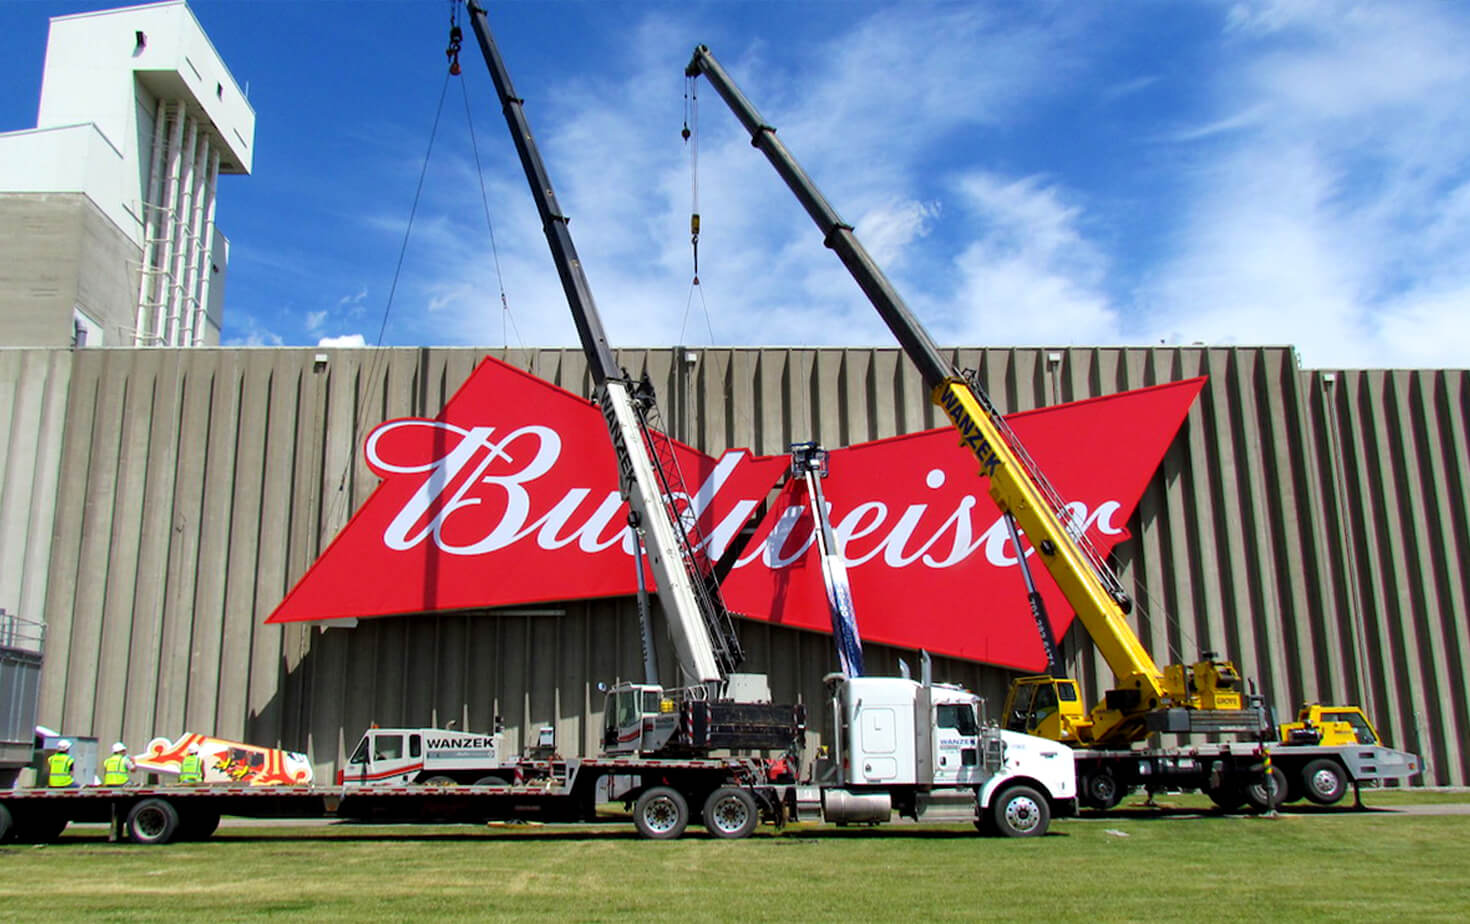 Budweiser Moorhead MN Largescale Wall Sign Install on Side of Building